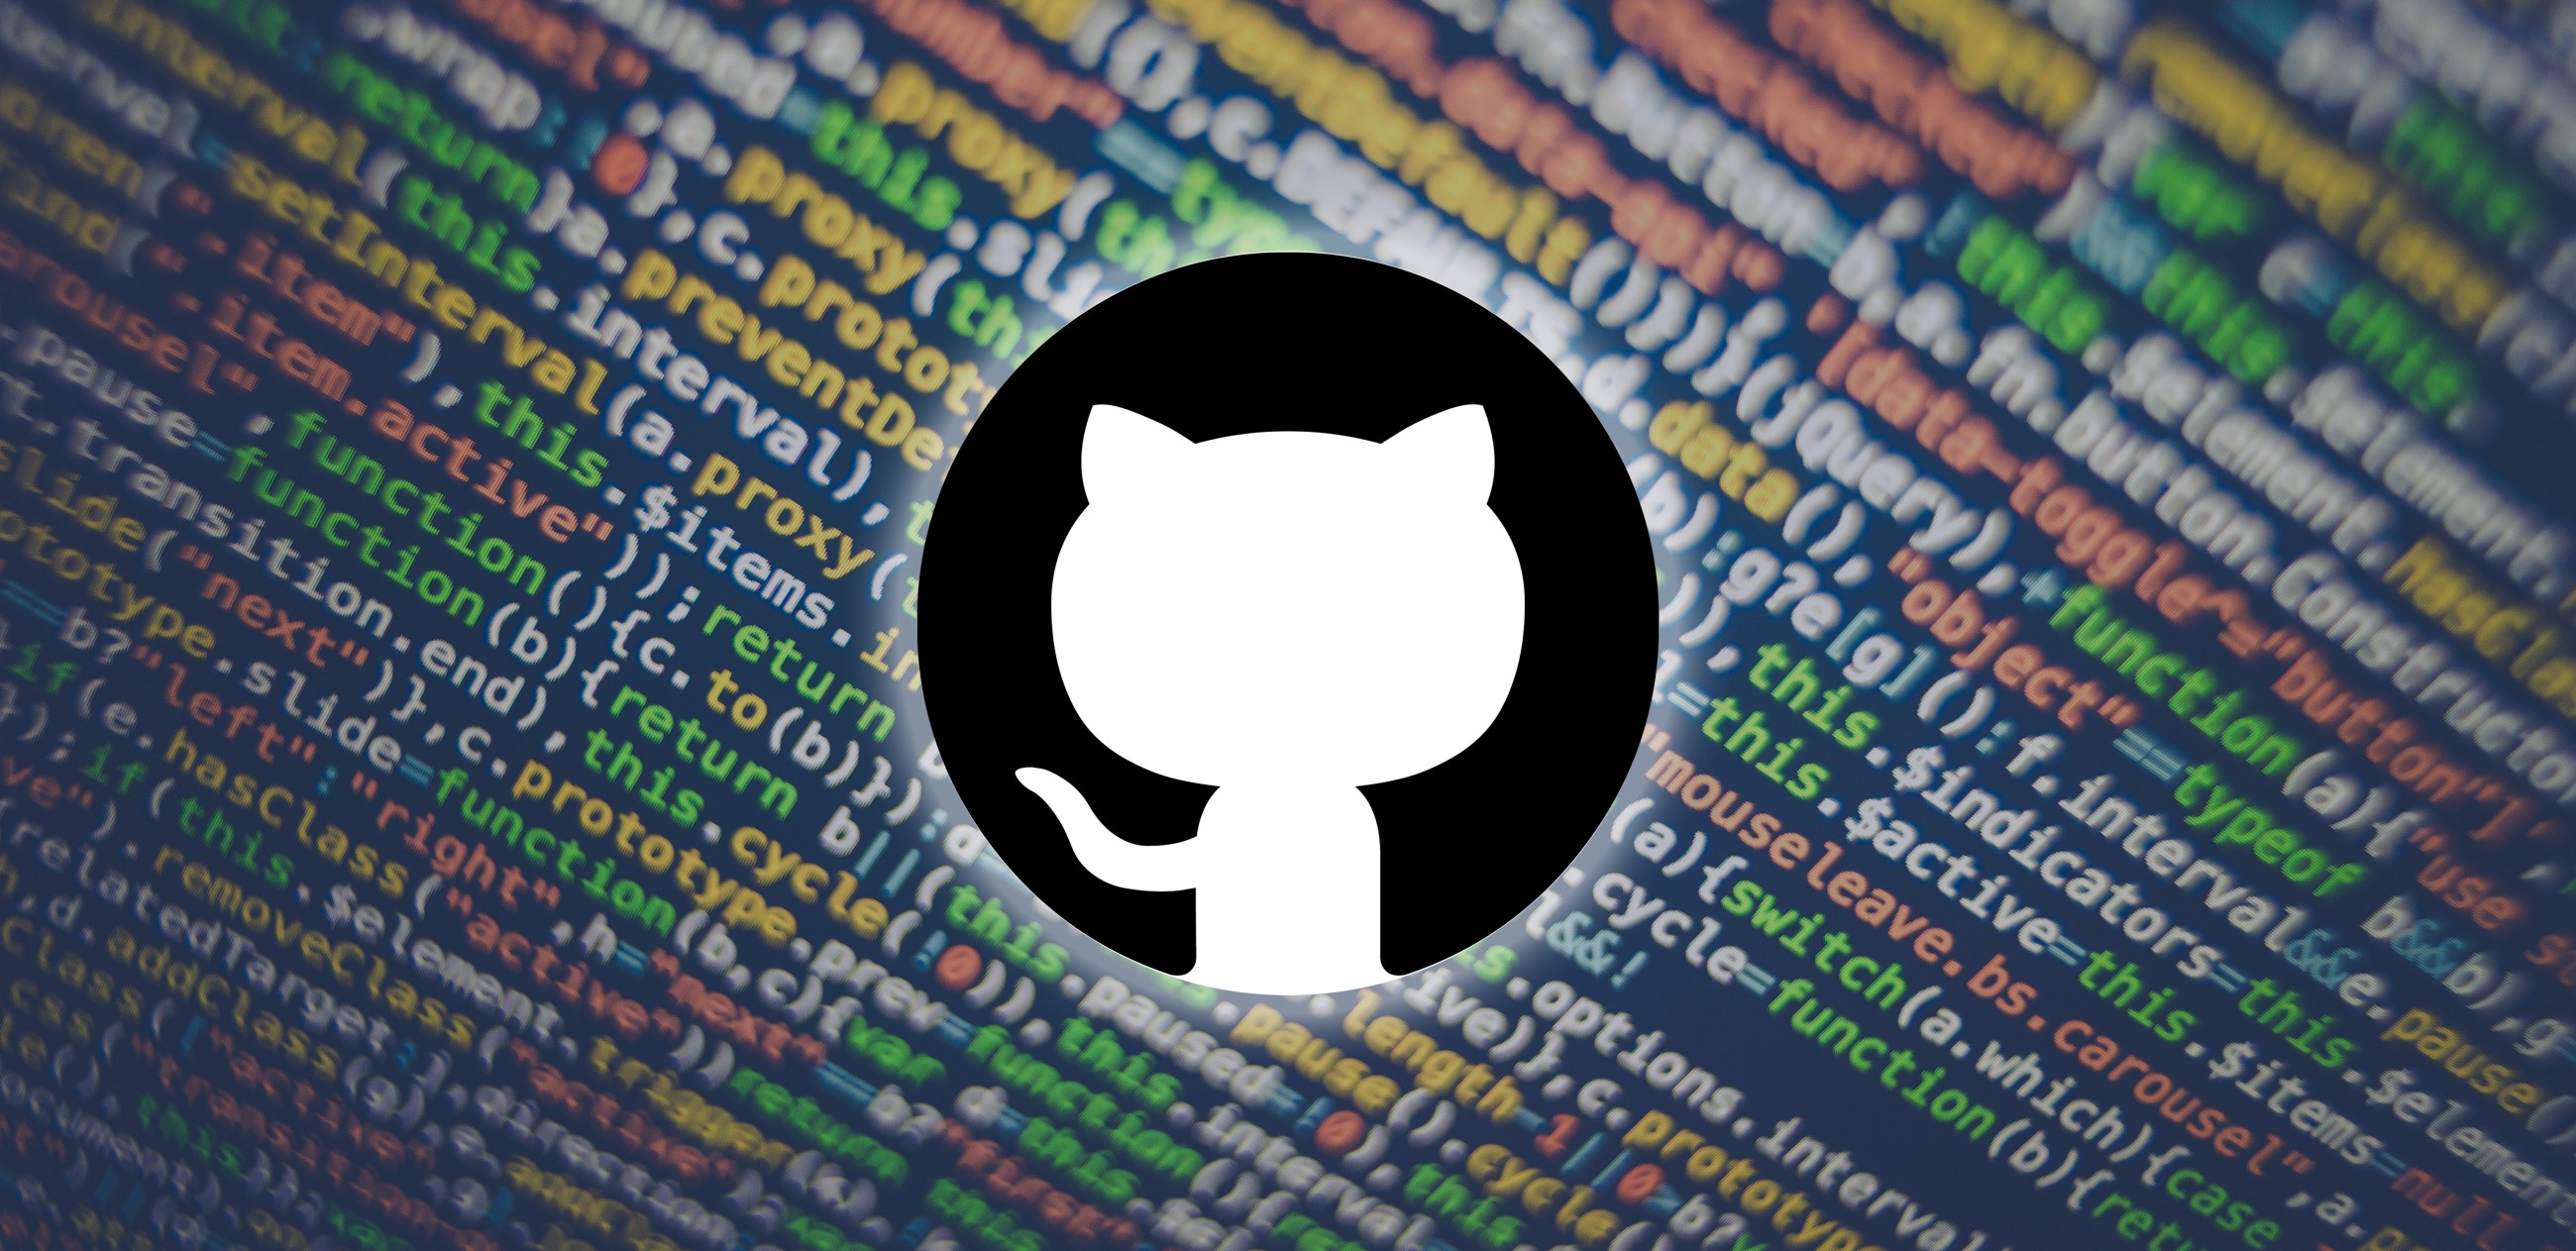 github logo with codes in the background